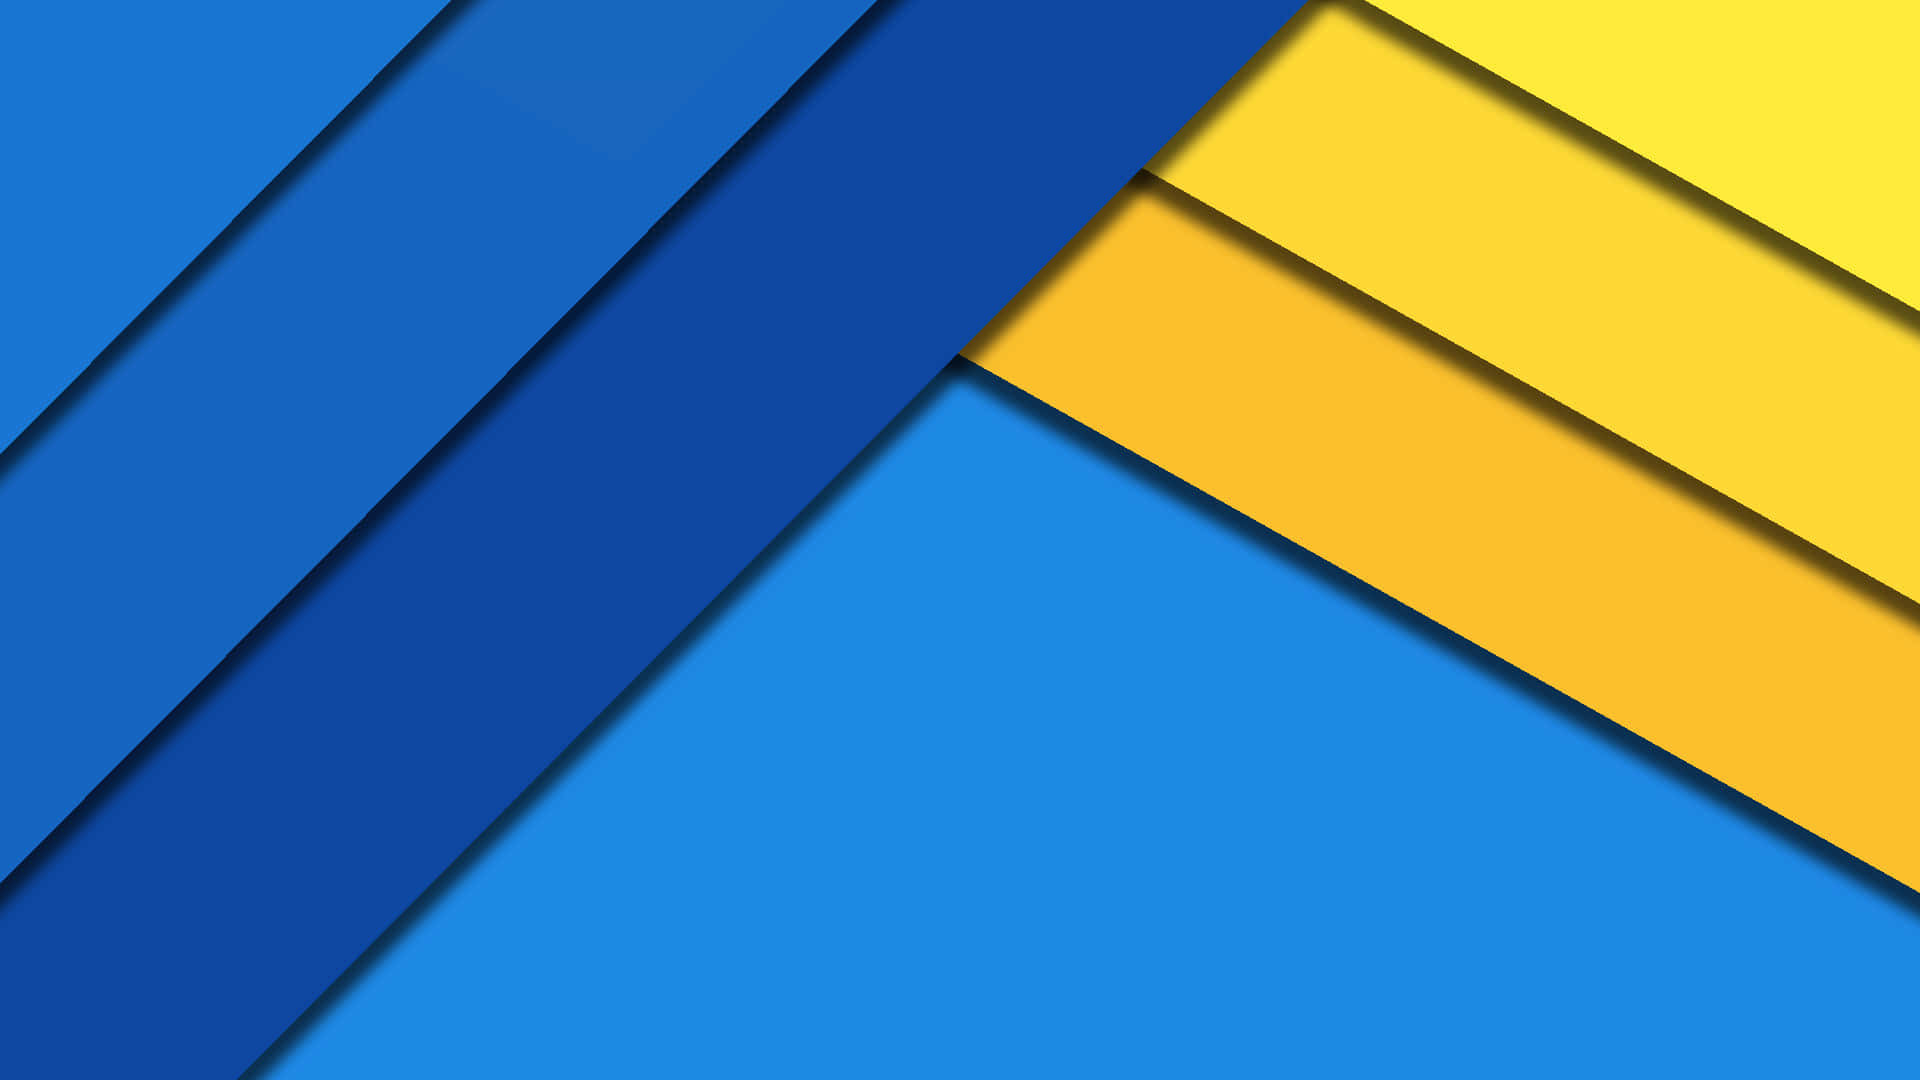 Download Blue And Yellow Background 1920 X 1080 Wallpapers com